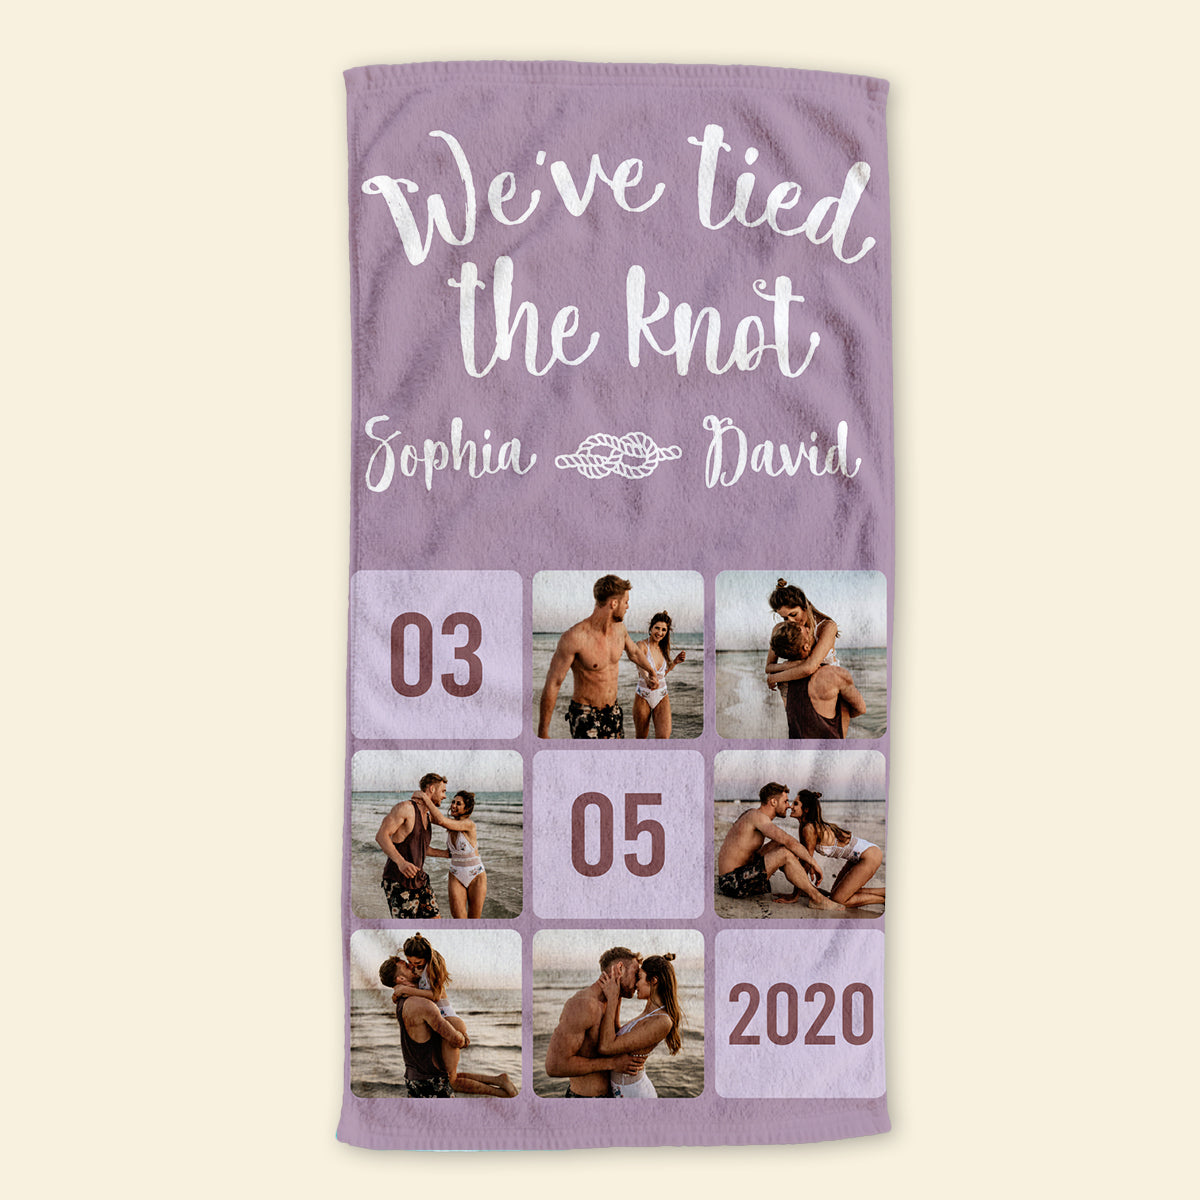 We've Tied The Knot- Custom Photo Personalized Beach Towel- Anniversary Gift For Couple